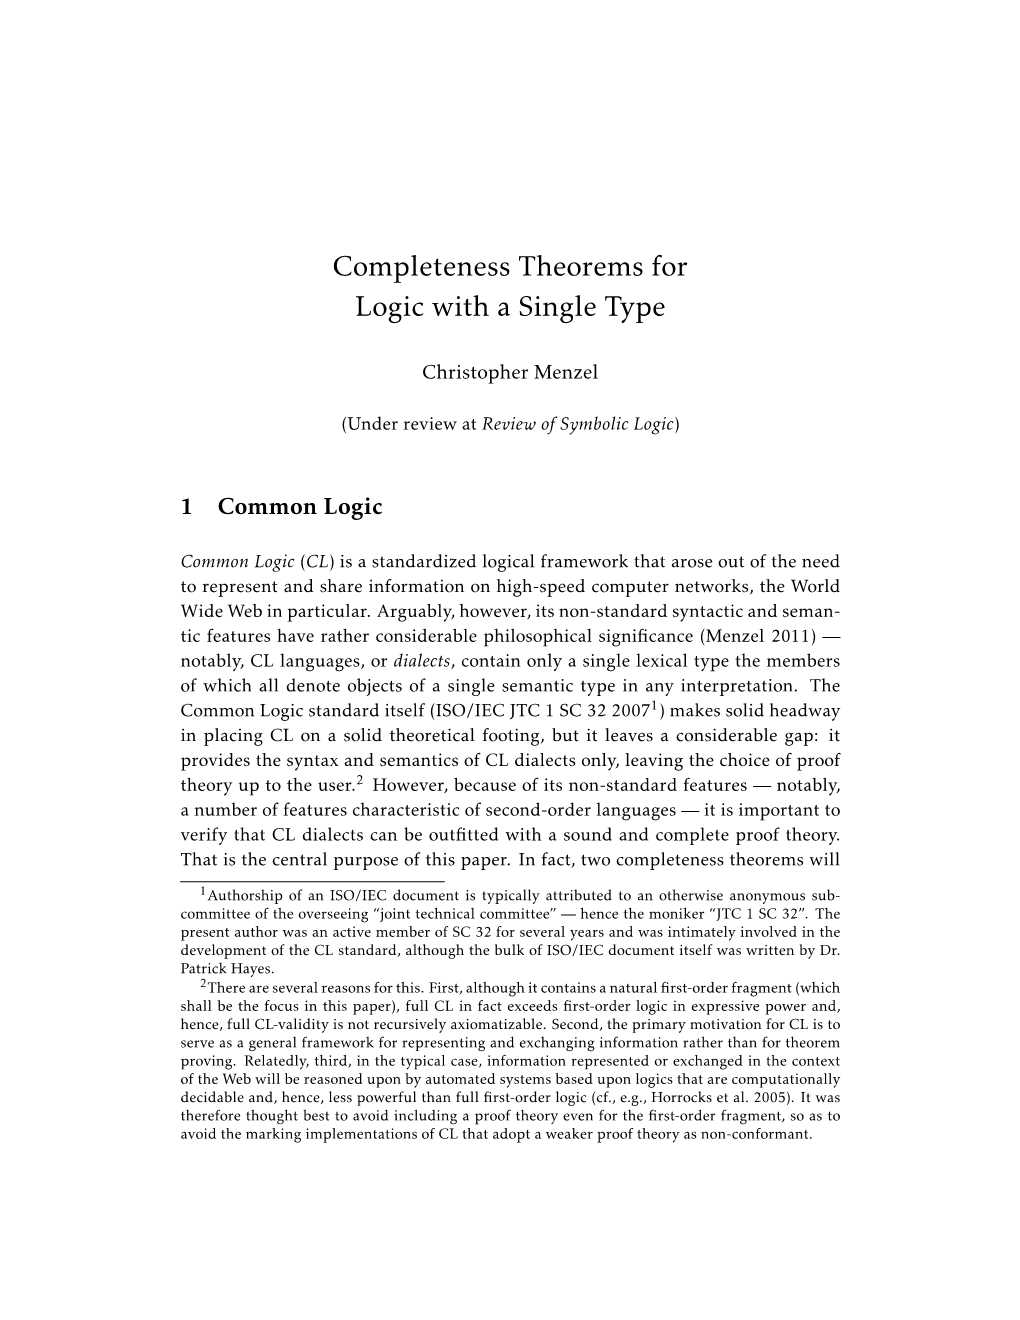 Completeness Theorems for Logic with a Single Type